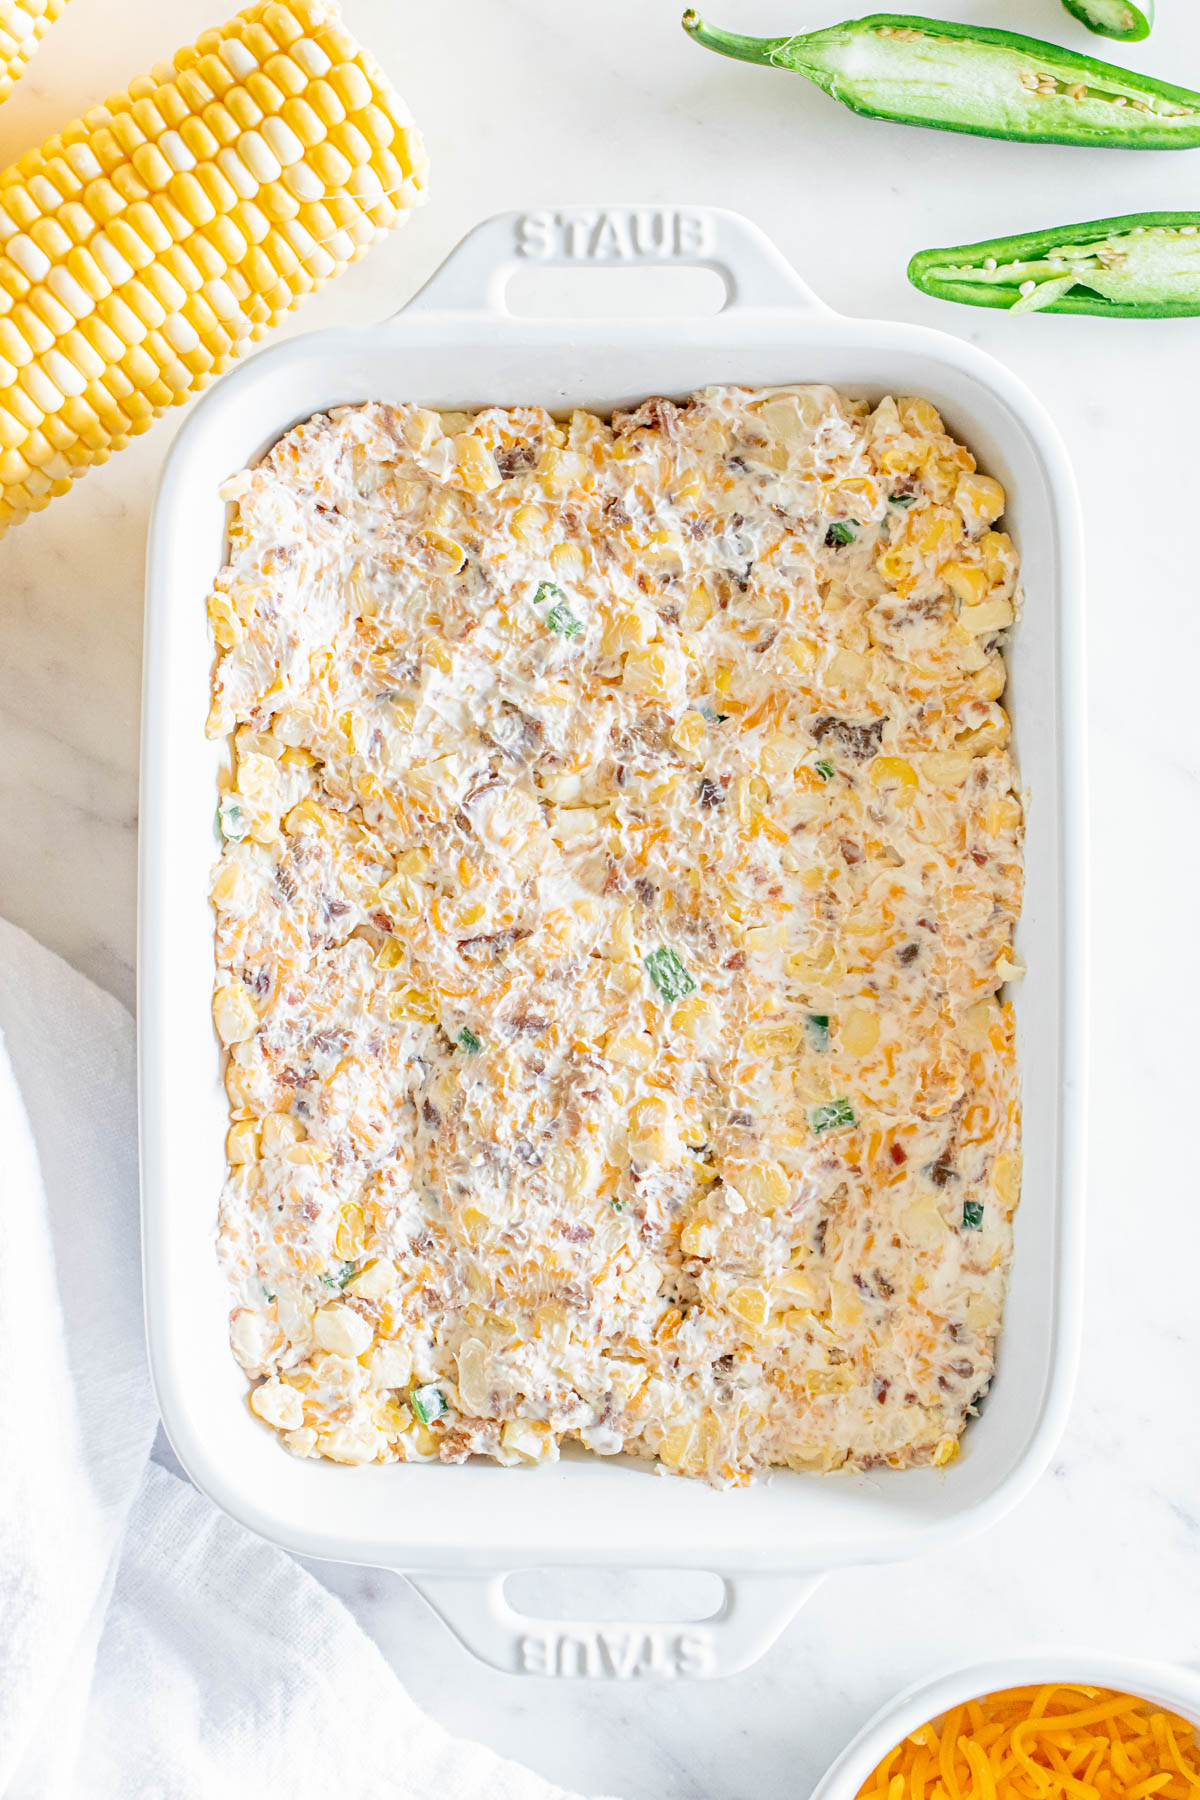 Cheesy corn casserole in a white dish with corn on the side.